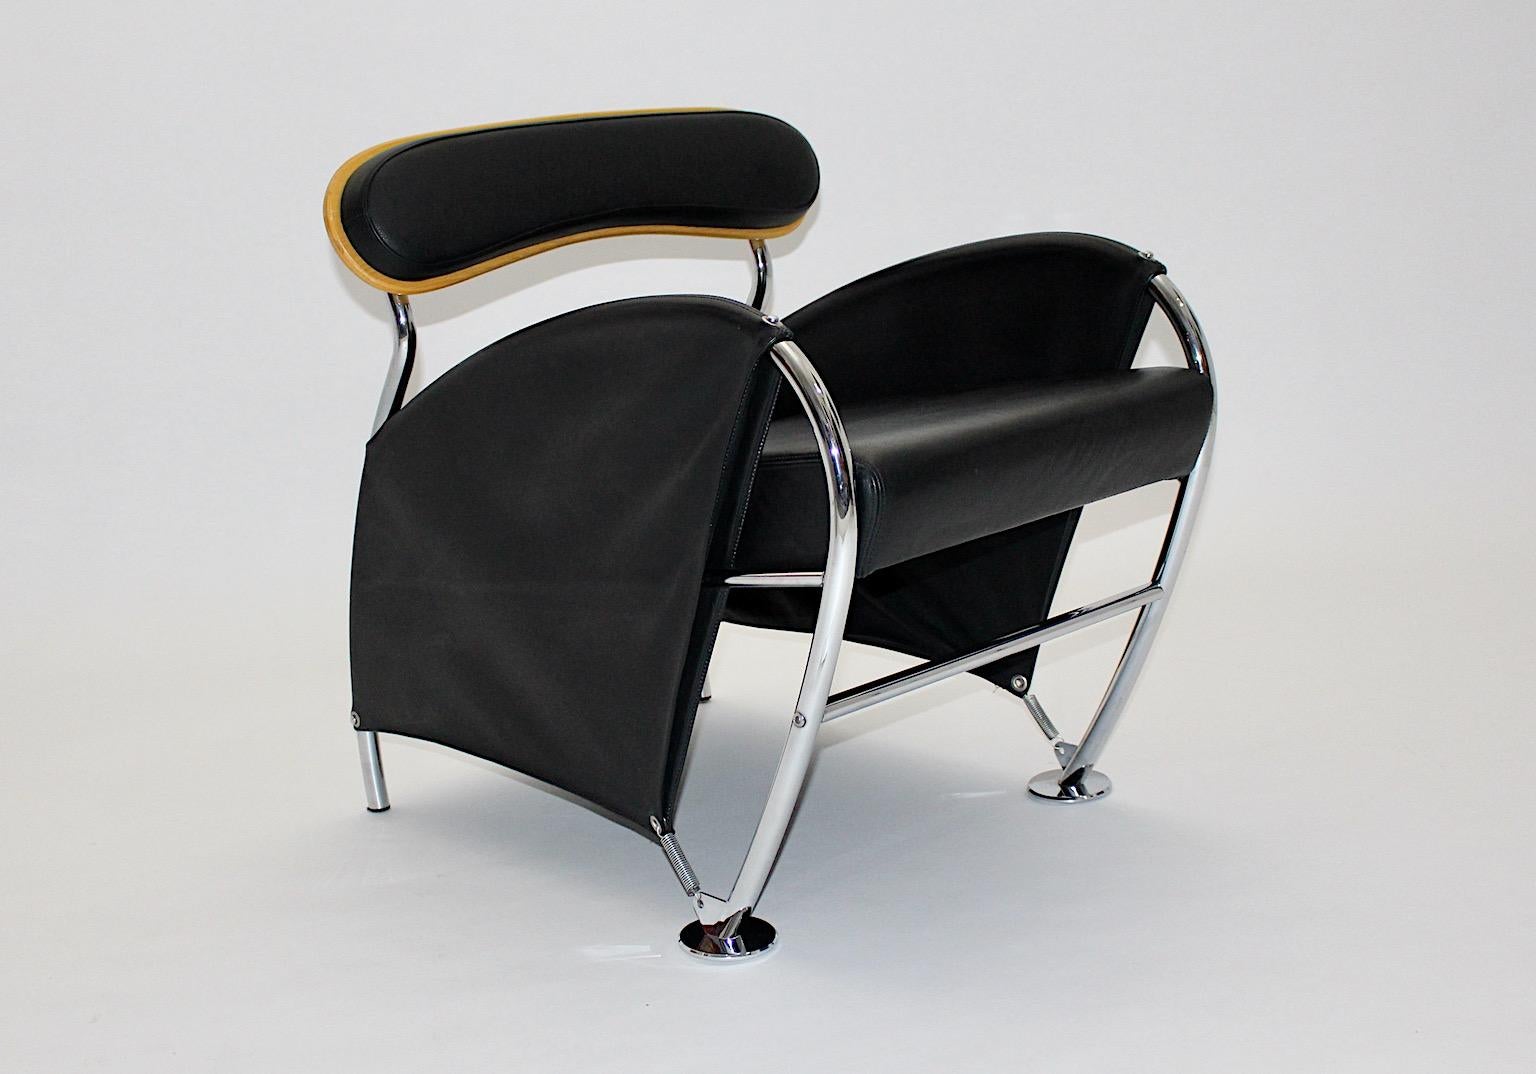 Italian Modern vintage lounge chair or armchair, model Numero Uno, from leather and chrome by Massimo Iosa Ghini for Moroso 1986, Italy.
Freestanding ergonomic lounge chair or armchair or easy chair from black leather seat and back with chrome